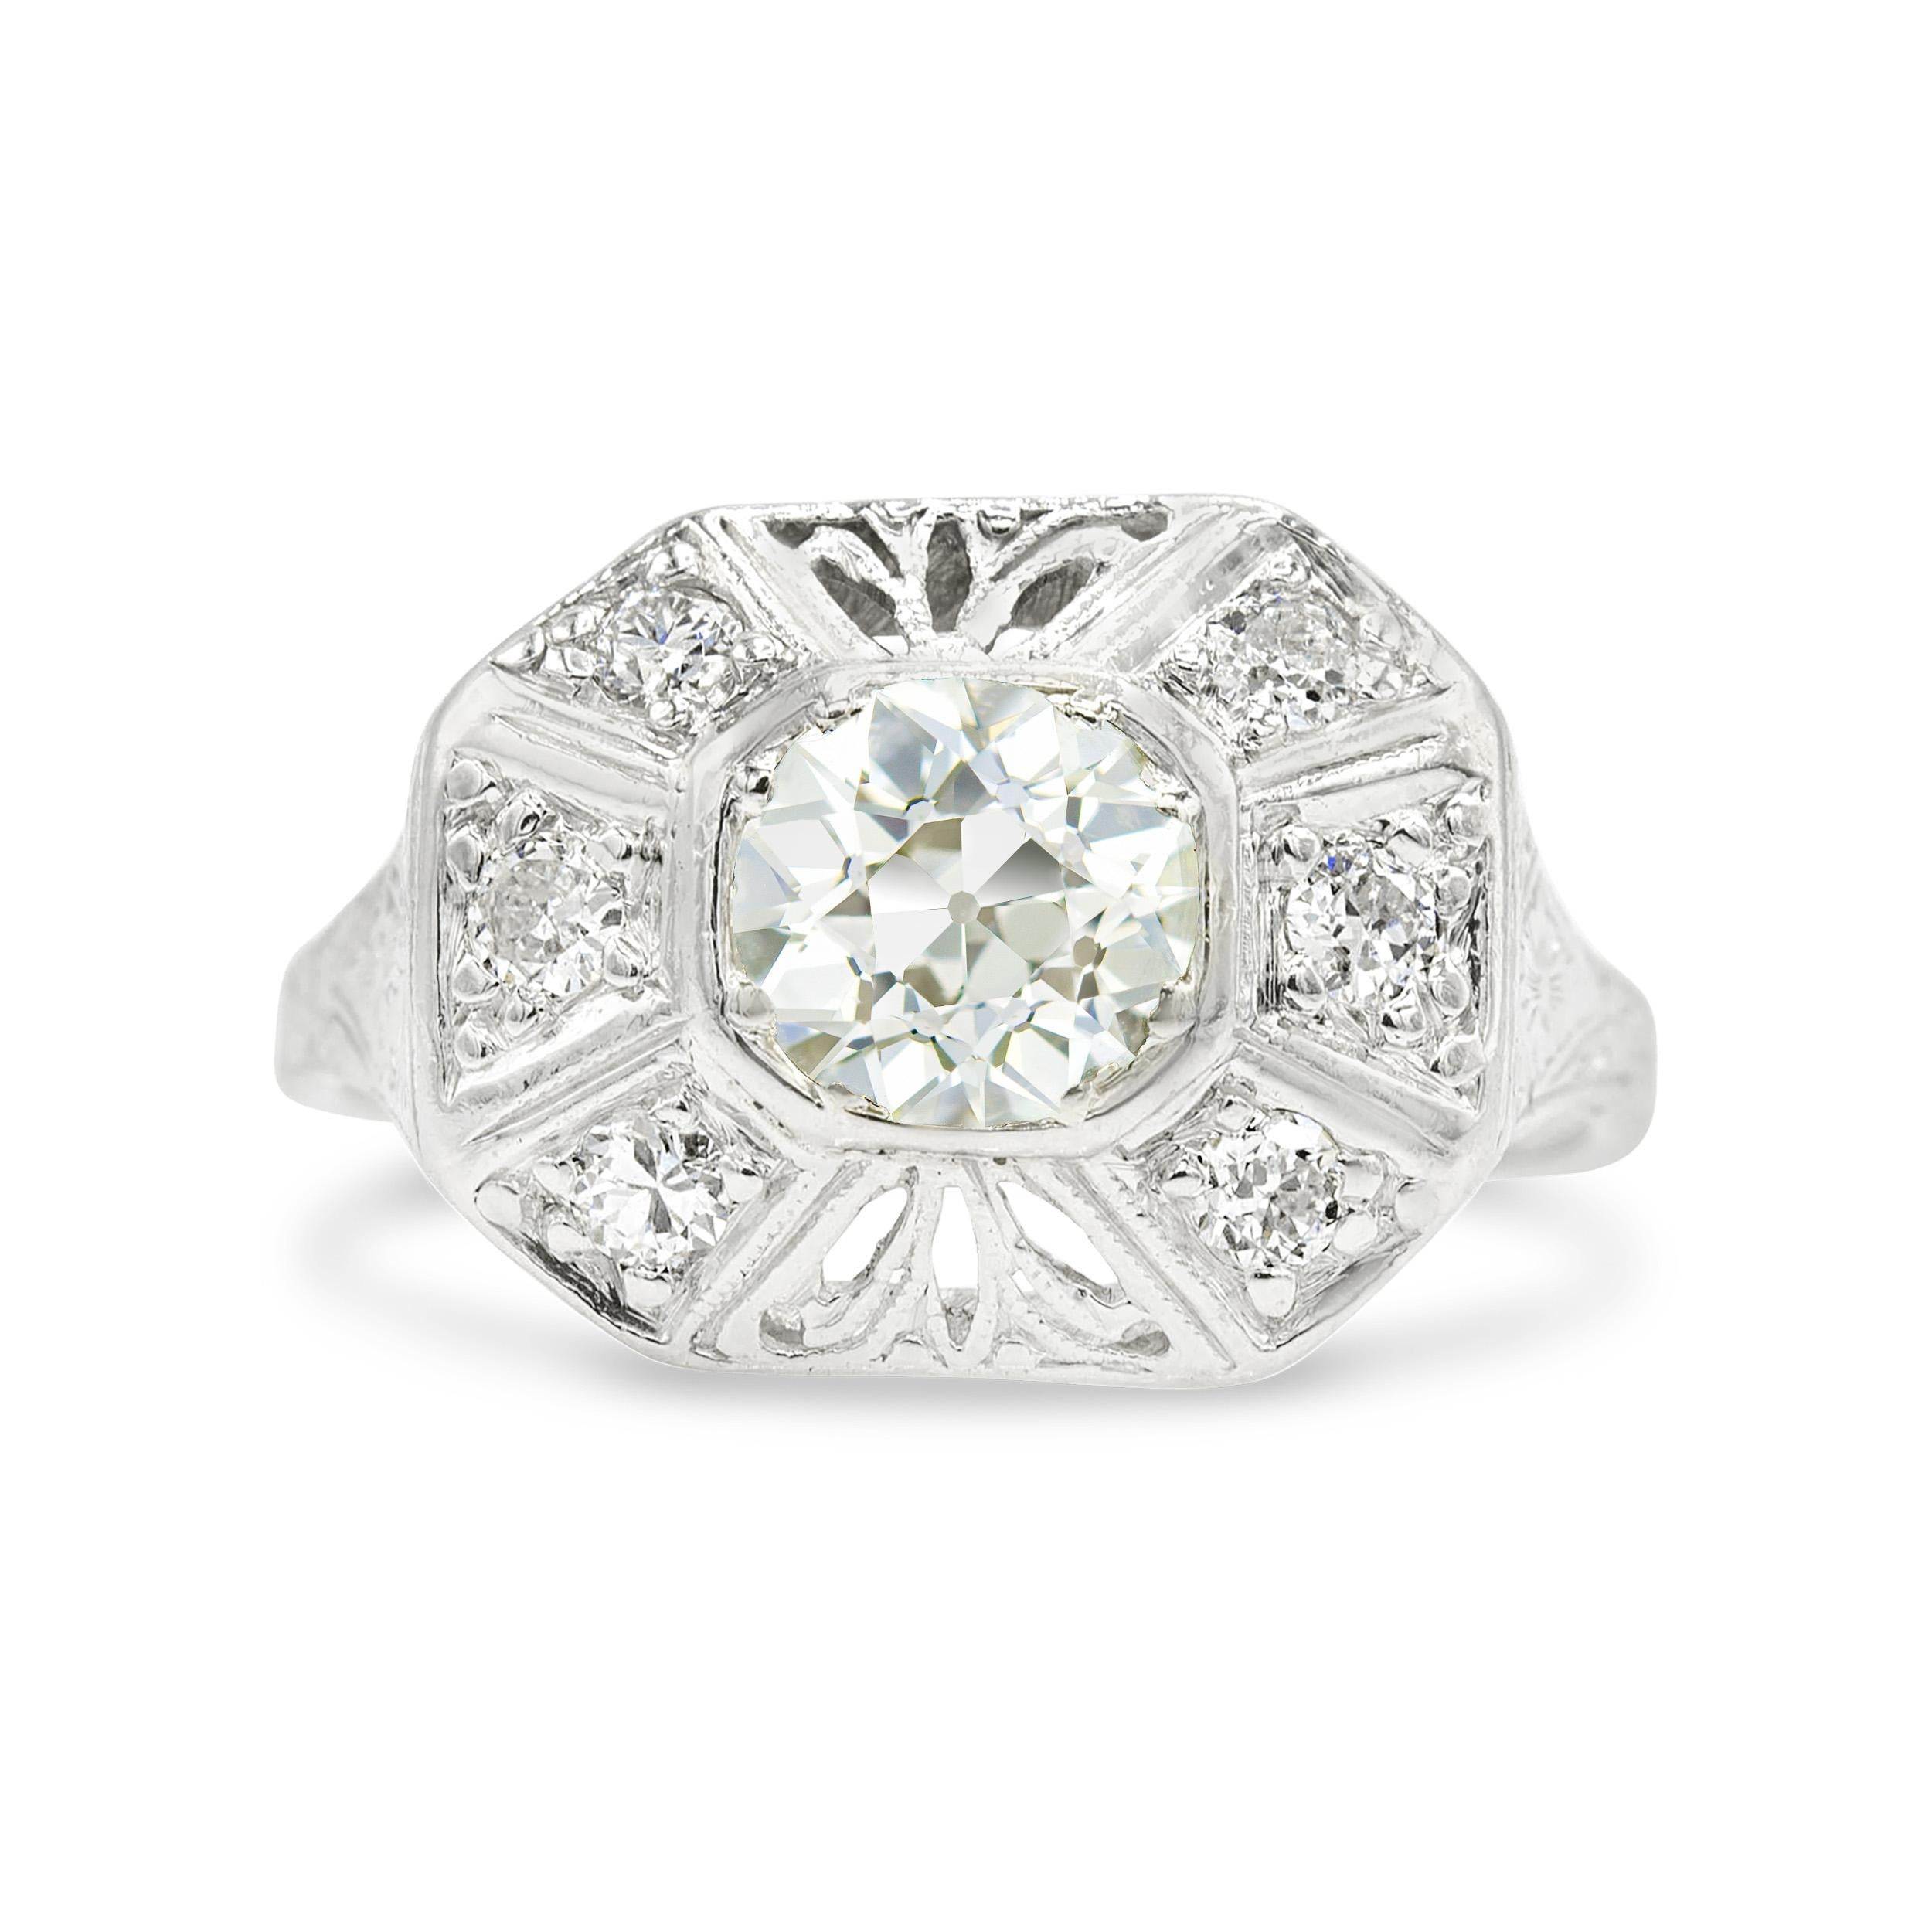 There's something so chic and unconventional about this Art Deco jewel. At the center is a bezel-set and irresistibly charming old mine cut diamond that's accented by 6 additional shimmering stones. Handcrafted in platinum, her geometric frame